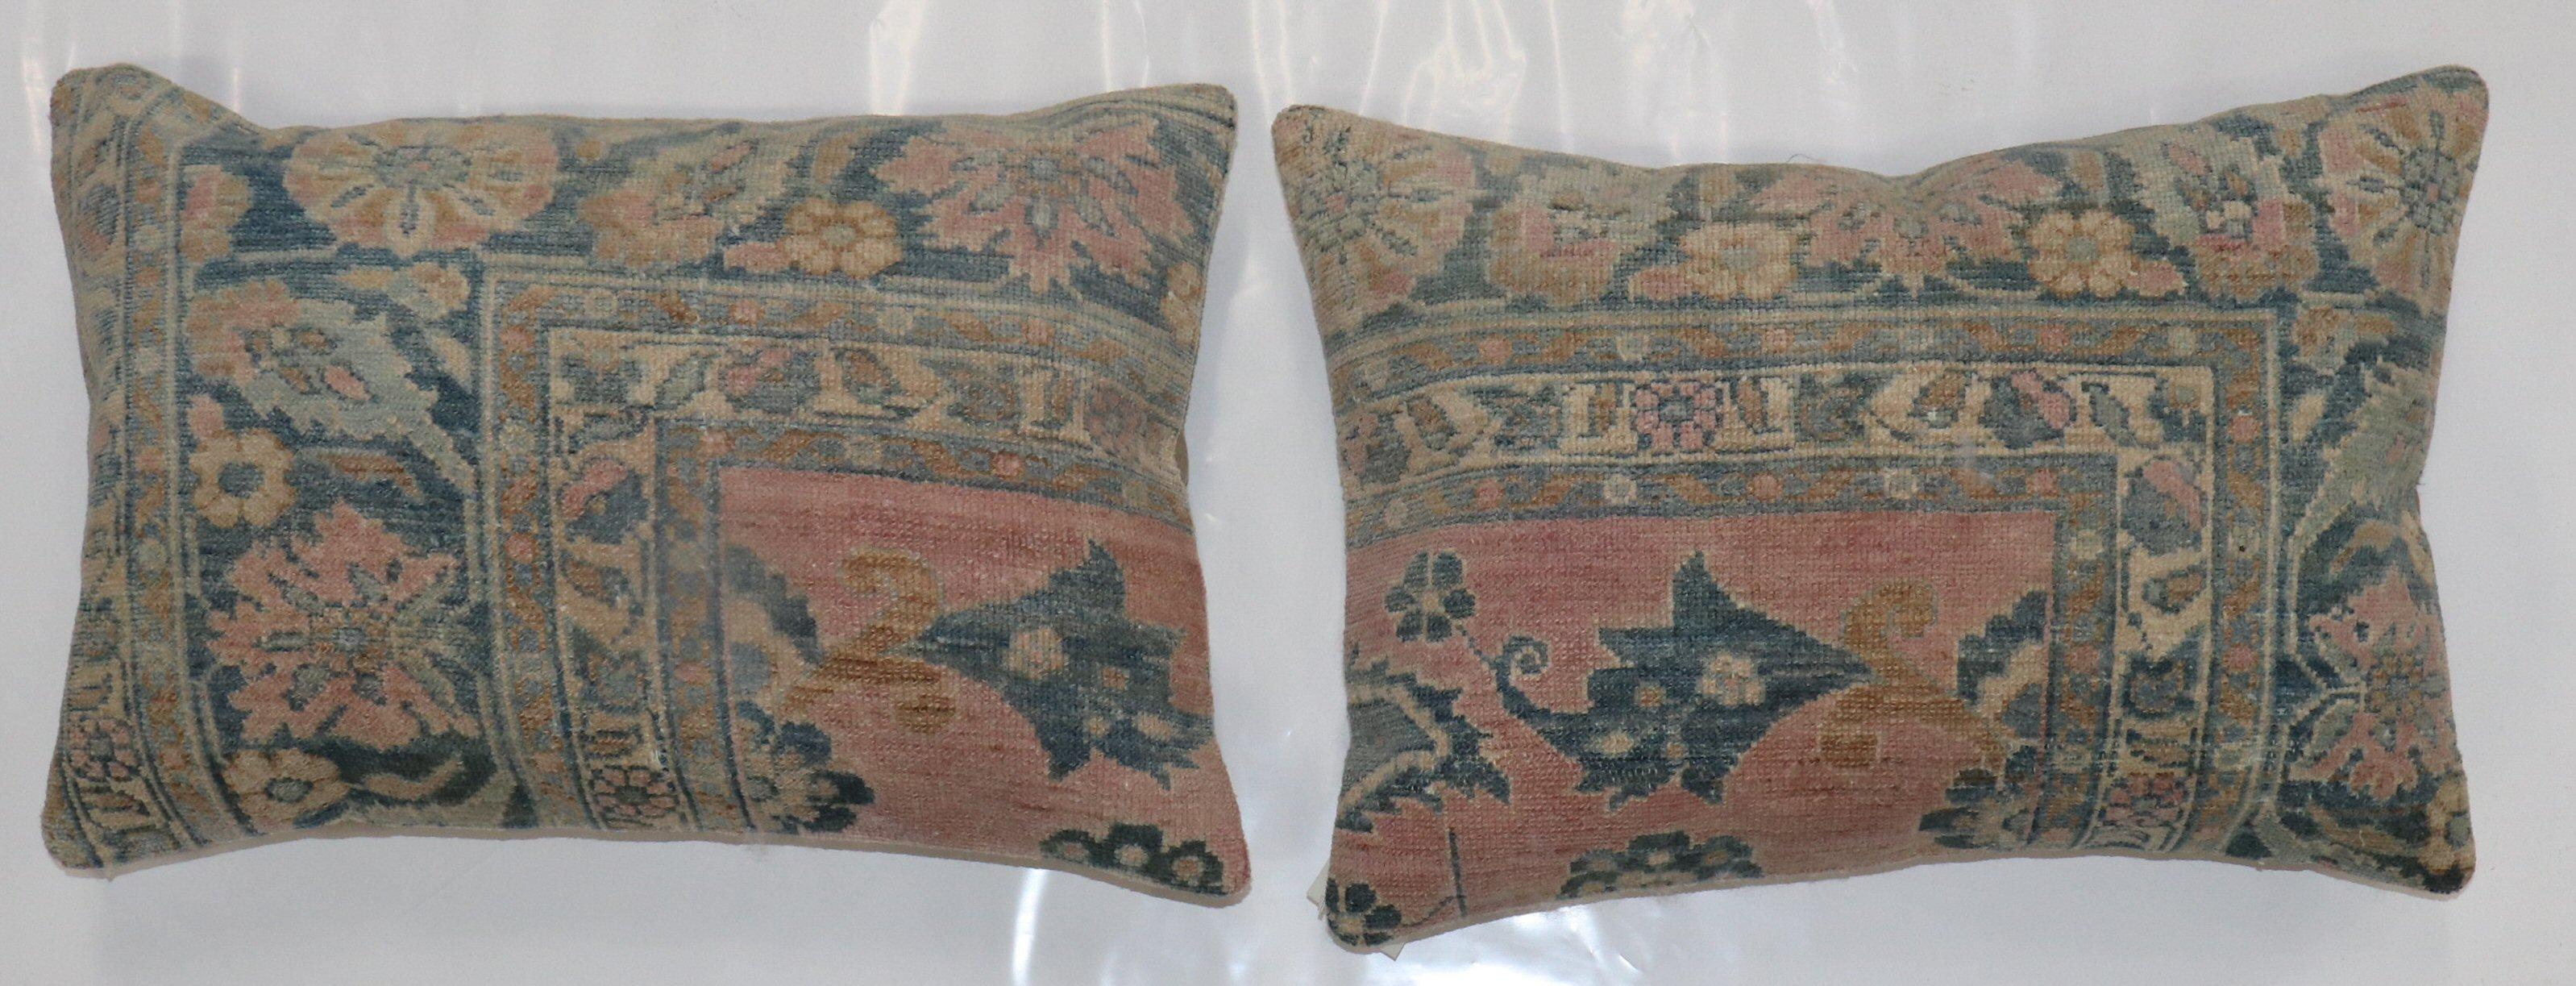 Set of pillows made from a 20th-century Persian Lilihan rug. 

Both measure 16'' x 24''.